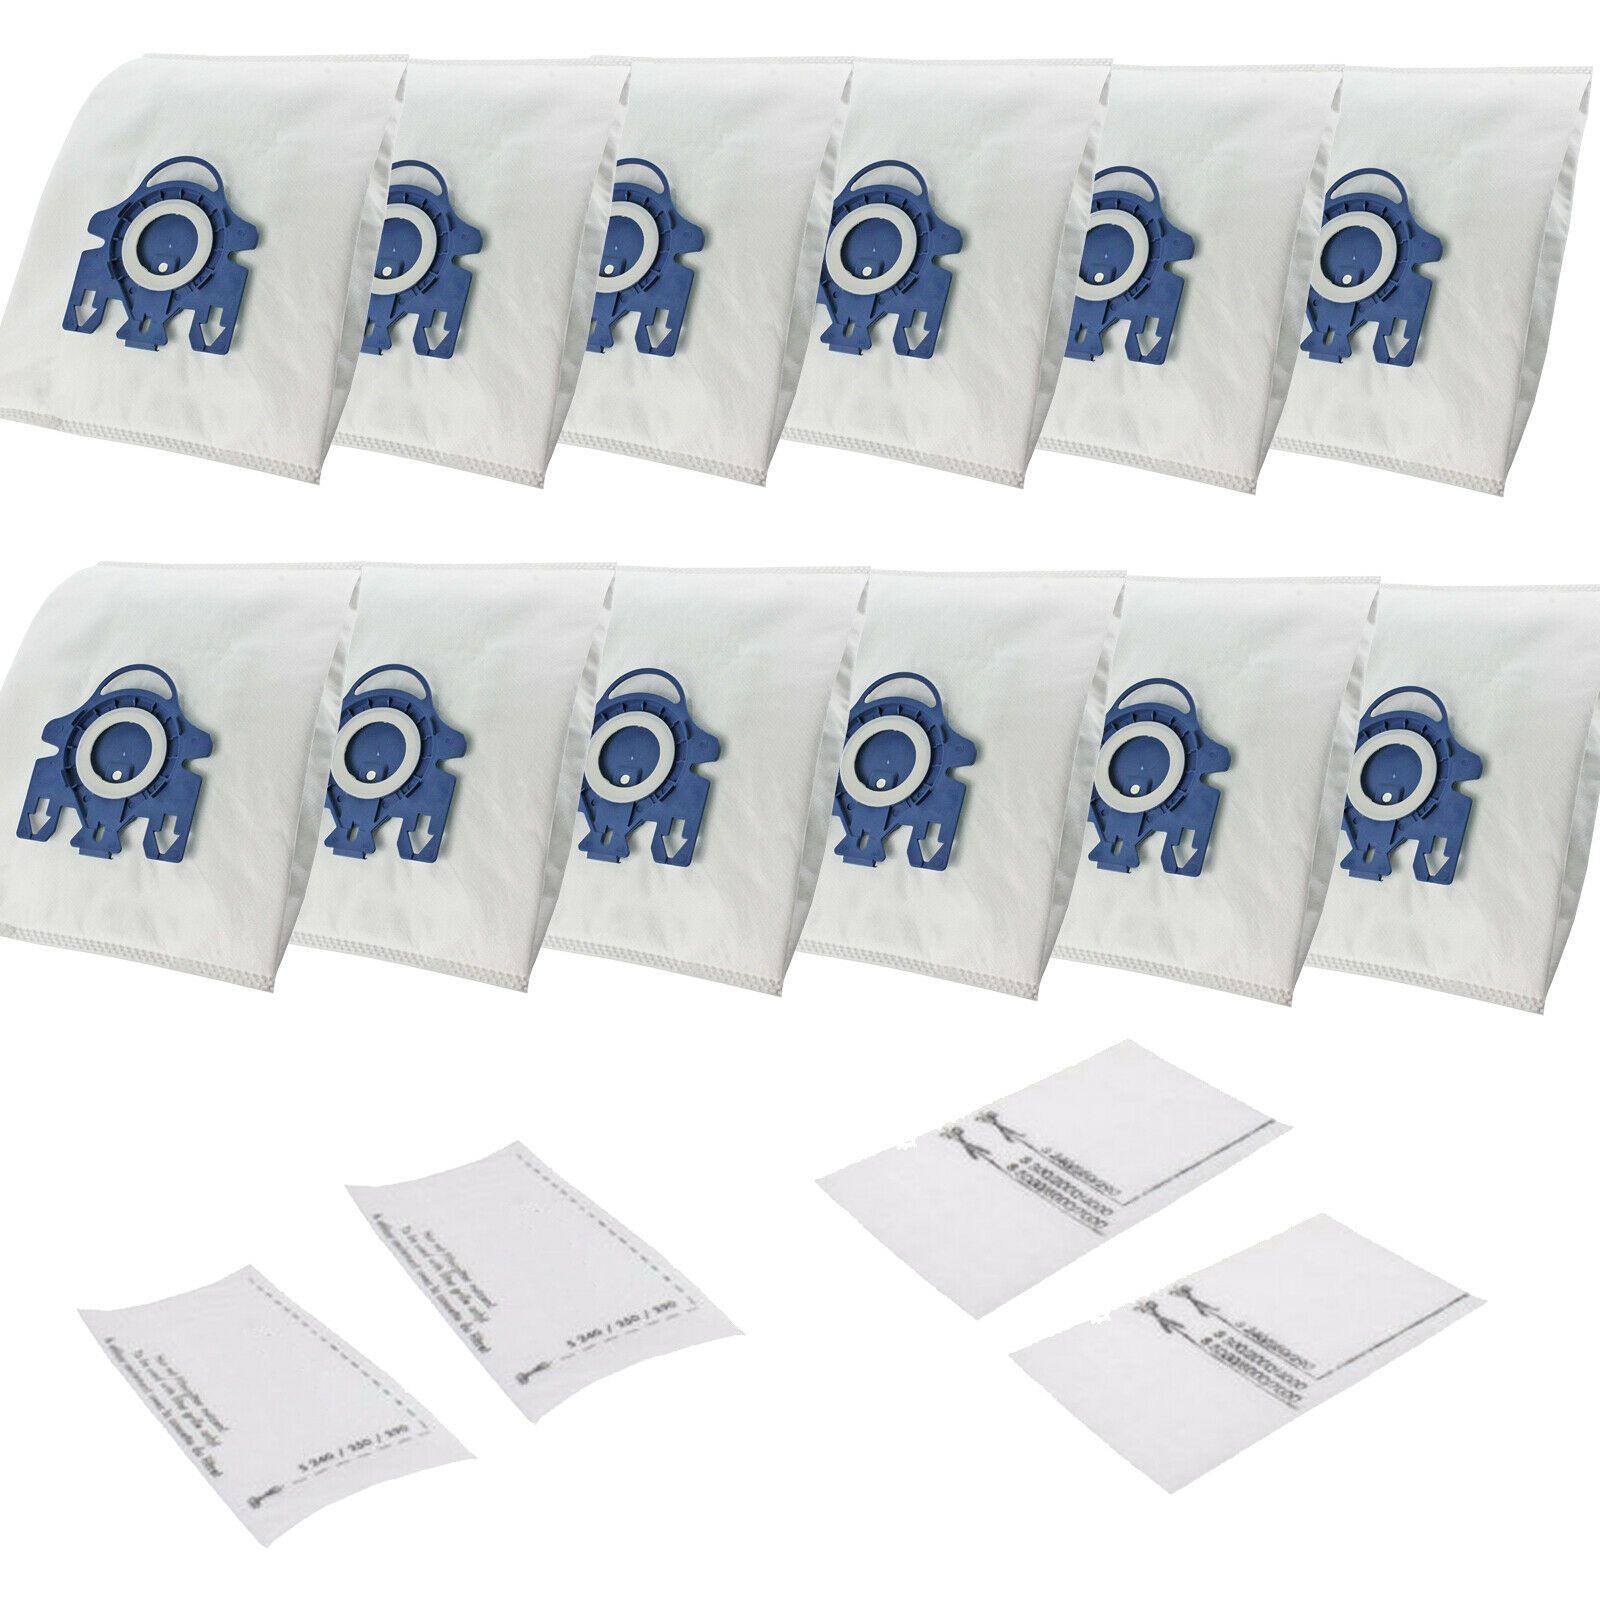 12 Synthetic Vacuum Bag + 8 Filter For Miele S5780 S5781 S5980 S8320 S8330 S8340 Sparesbarn